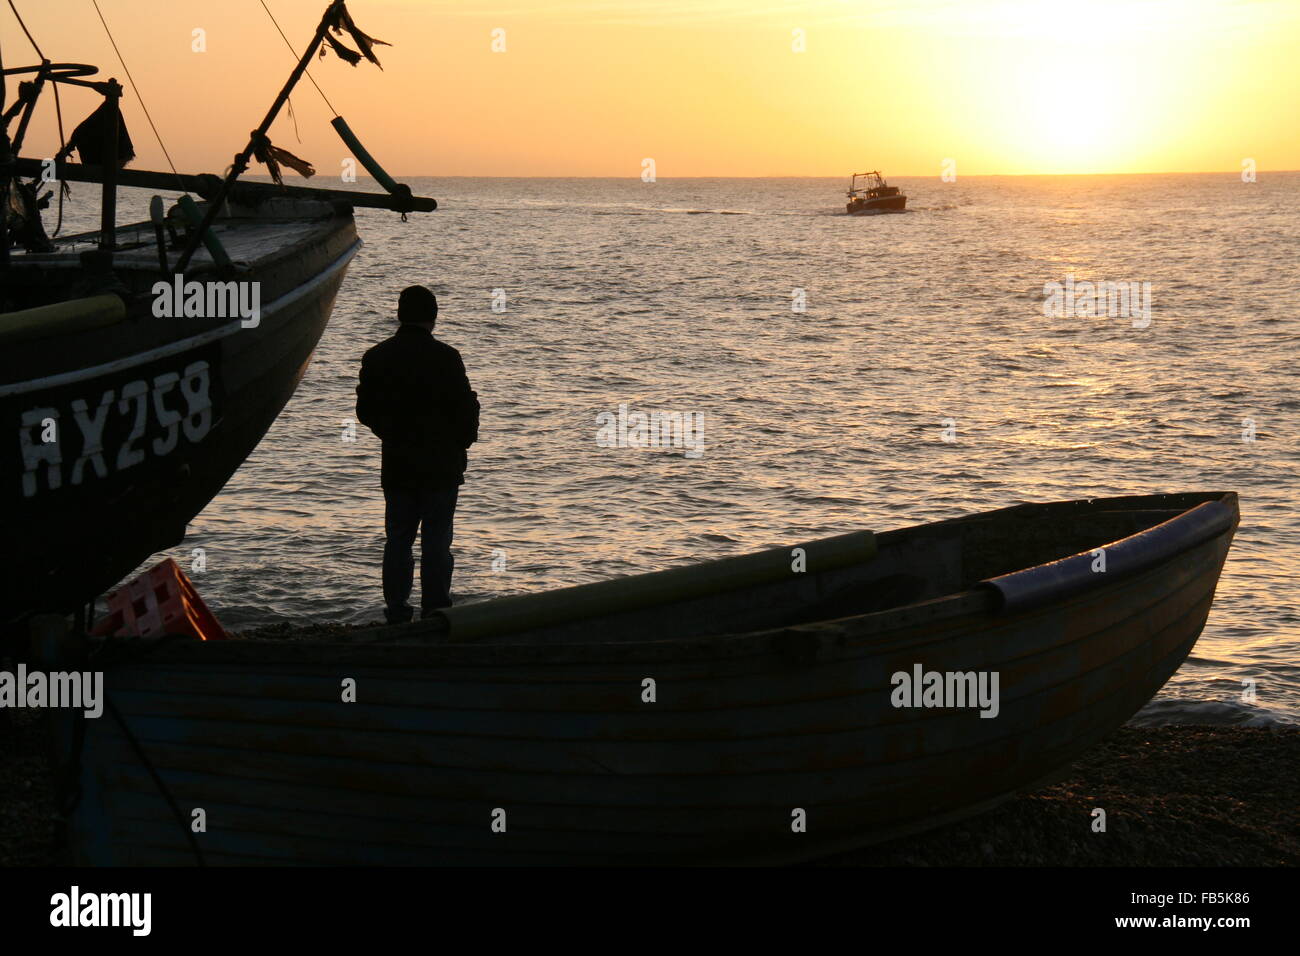 Sunrise in the popular town of Hastings shows the fishing beach at sunrise with a boat coming to shore and two other boats and a Stock Photo